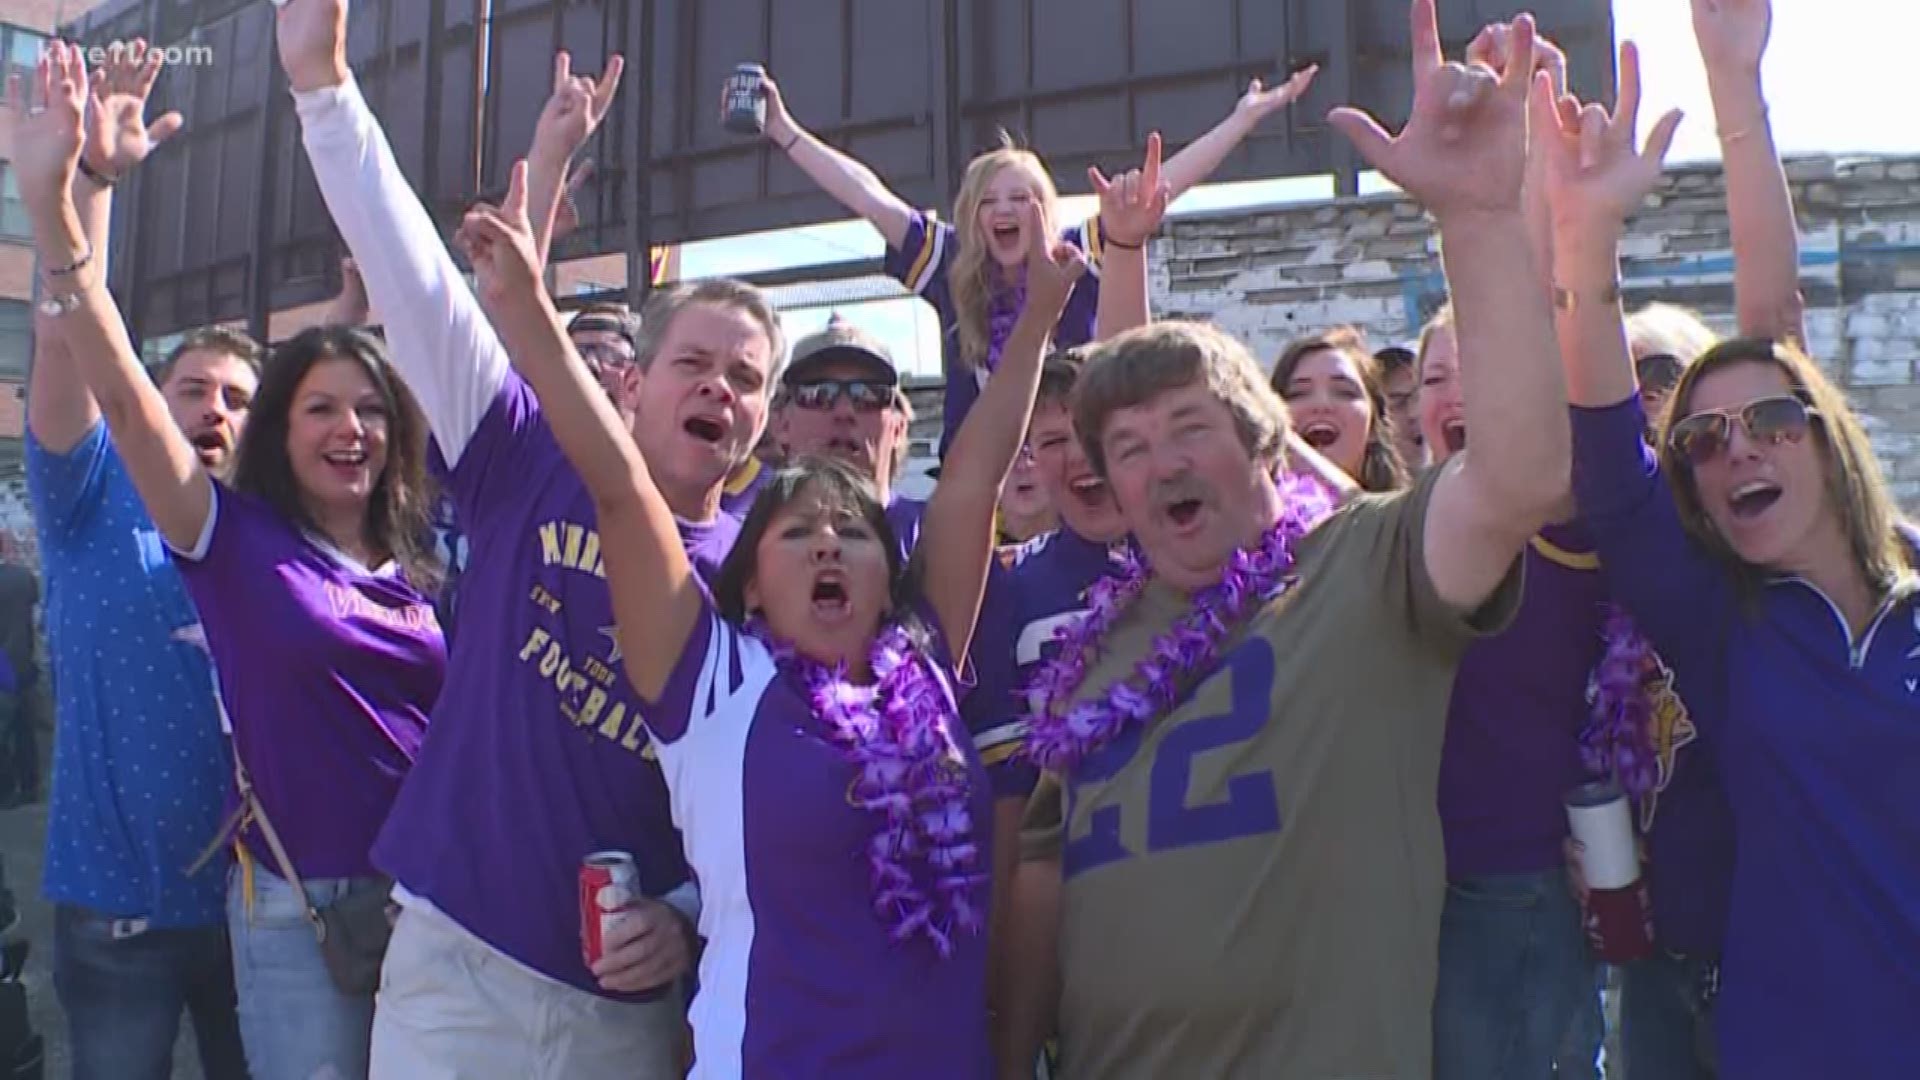 Outside U.S. Bank Stadium on Sunday, some fans were more cautious and said they are hoping that the Vikings make the Super Bowl. Other fans are calling it early and saying the Vikings will win the Super Bowl. https://kare11.tv/2QfP2Wt